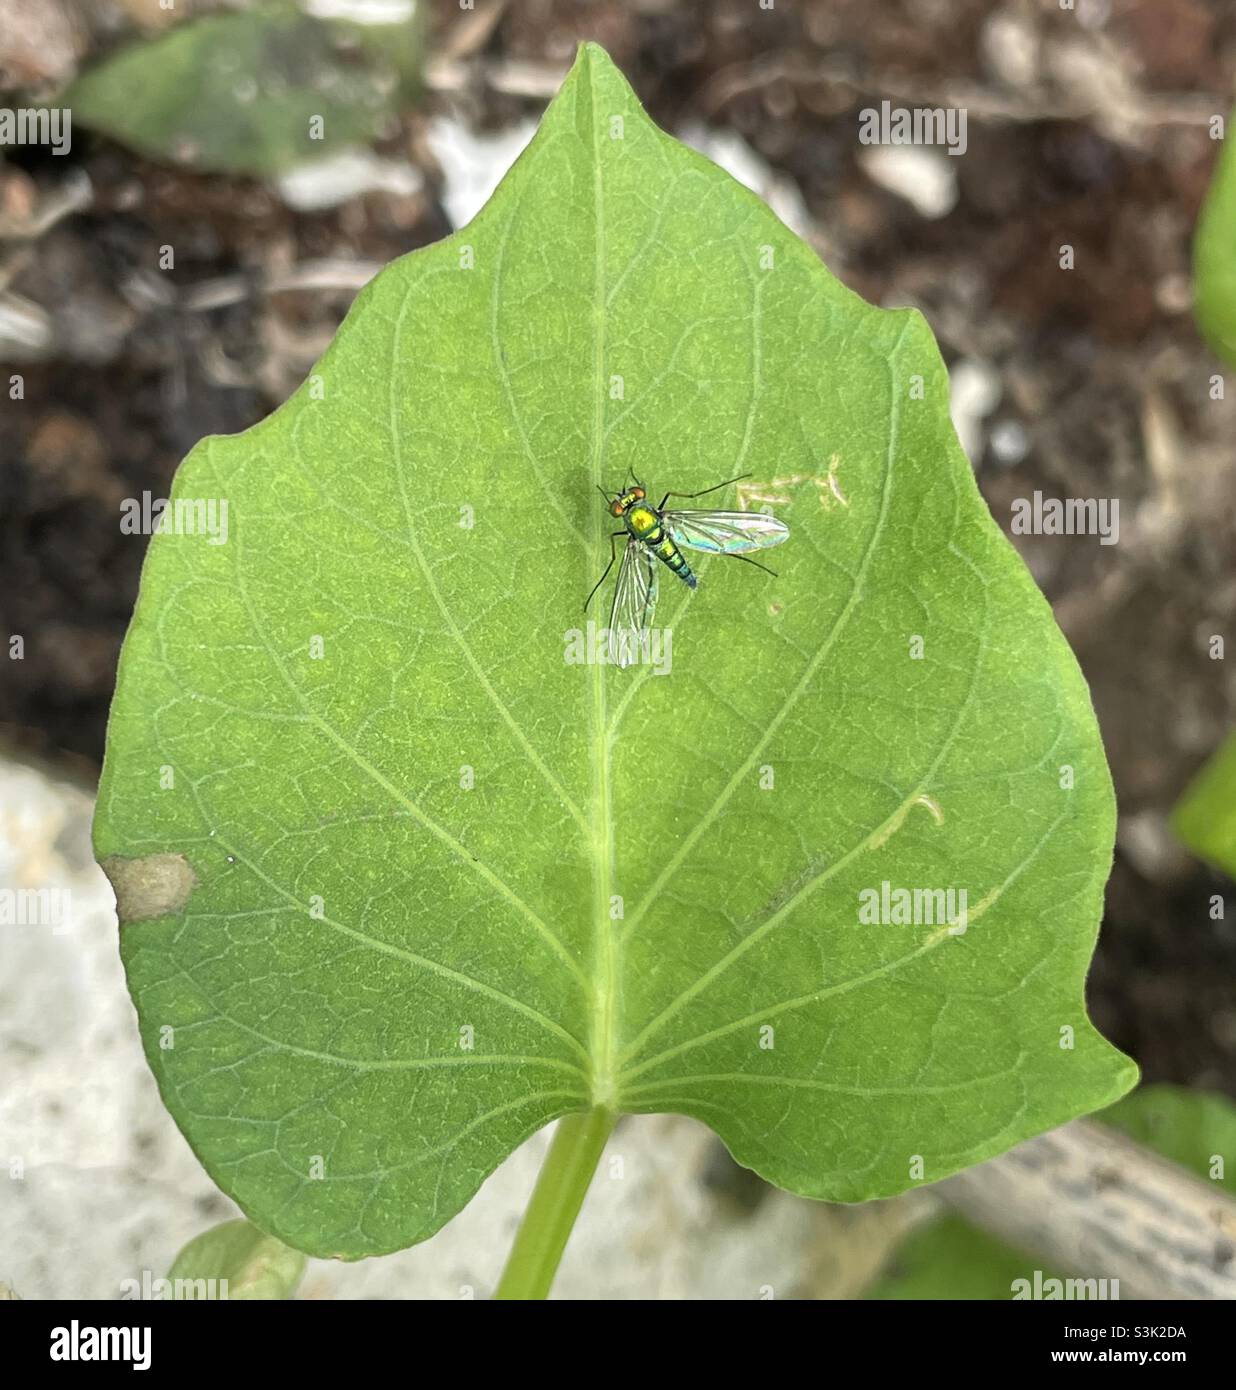 This rather small Long-legged fly with metallic luster is seen darting from leaf to leaf of sweet potato in Malaysia. Stock Photo